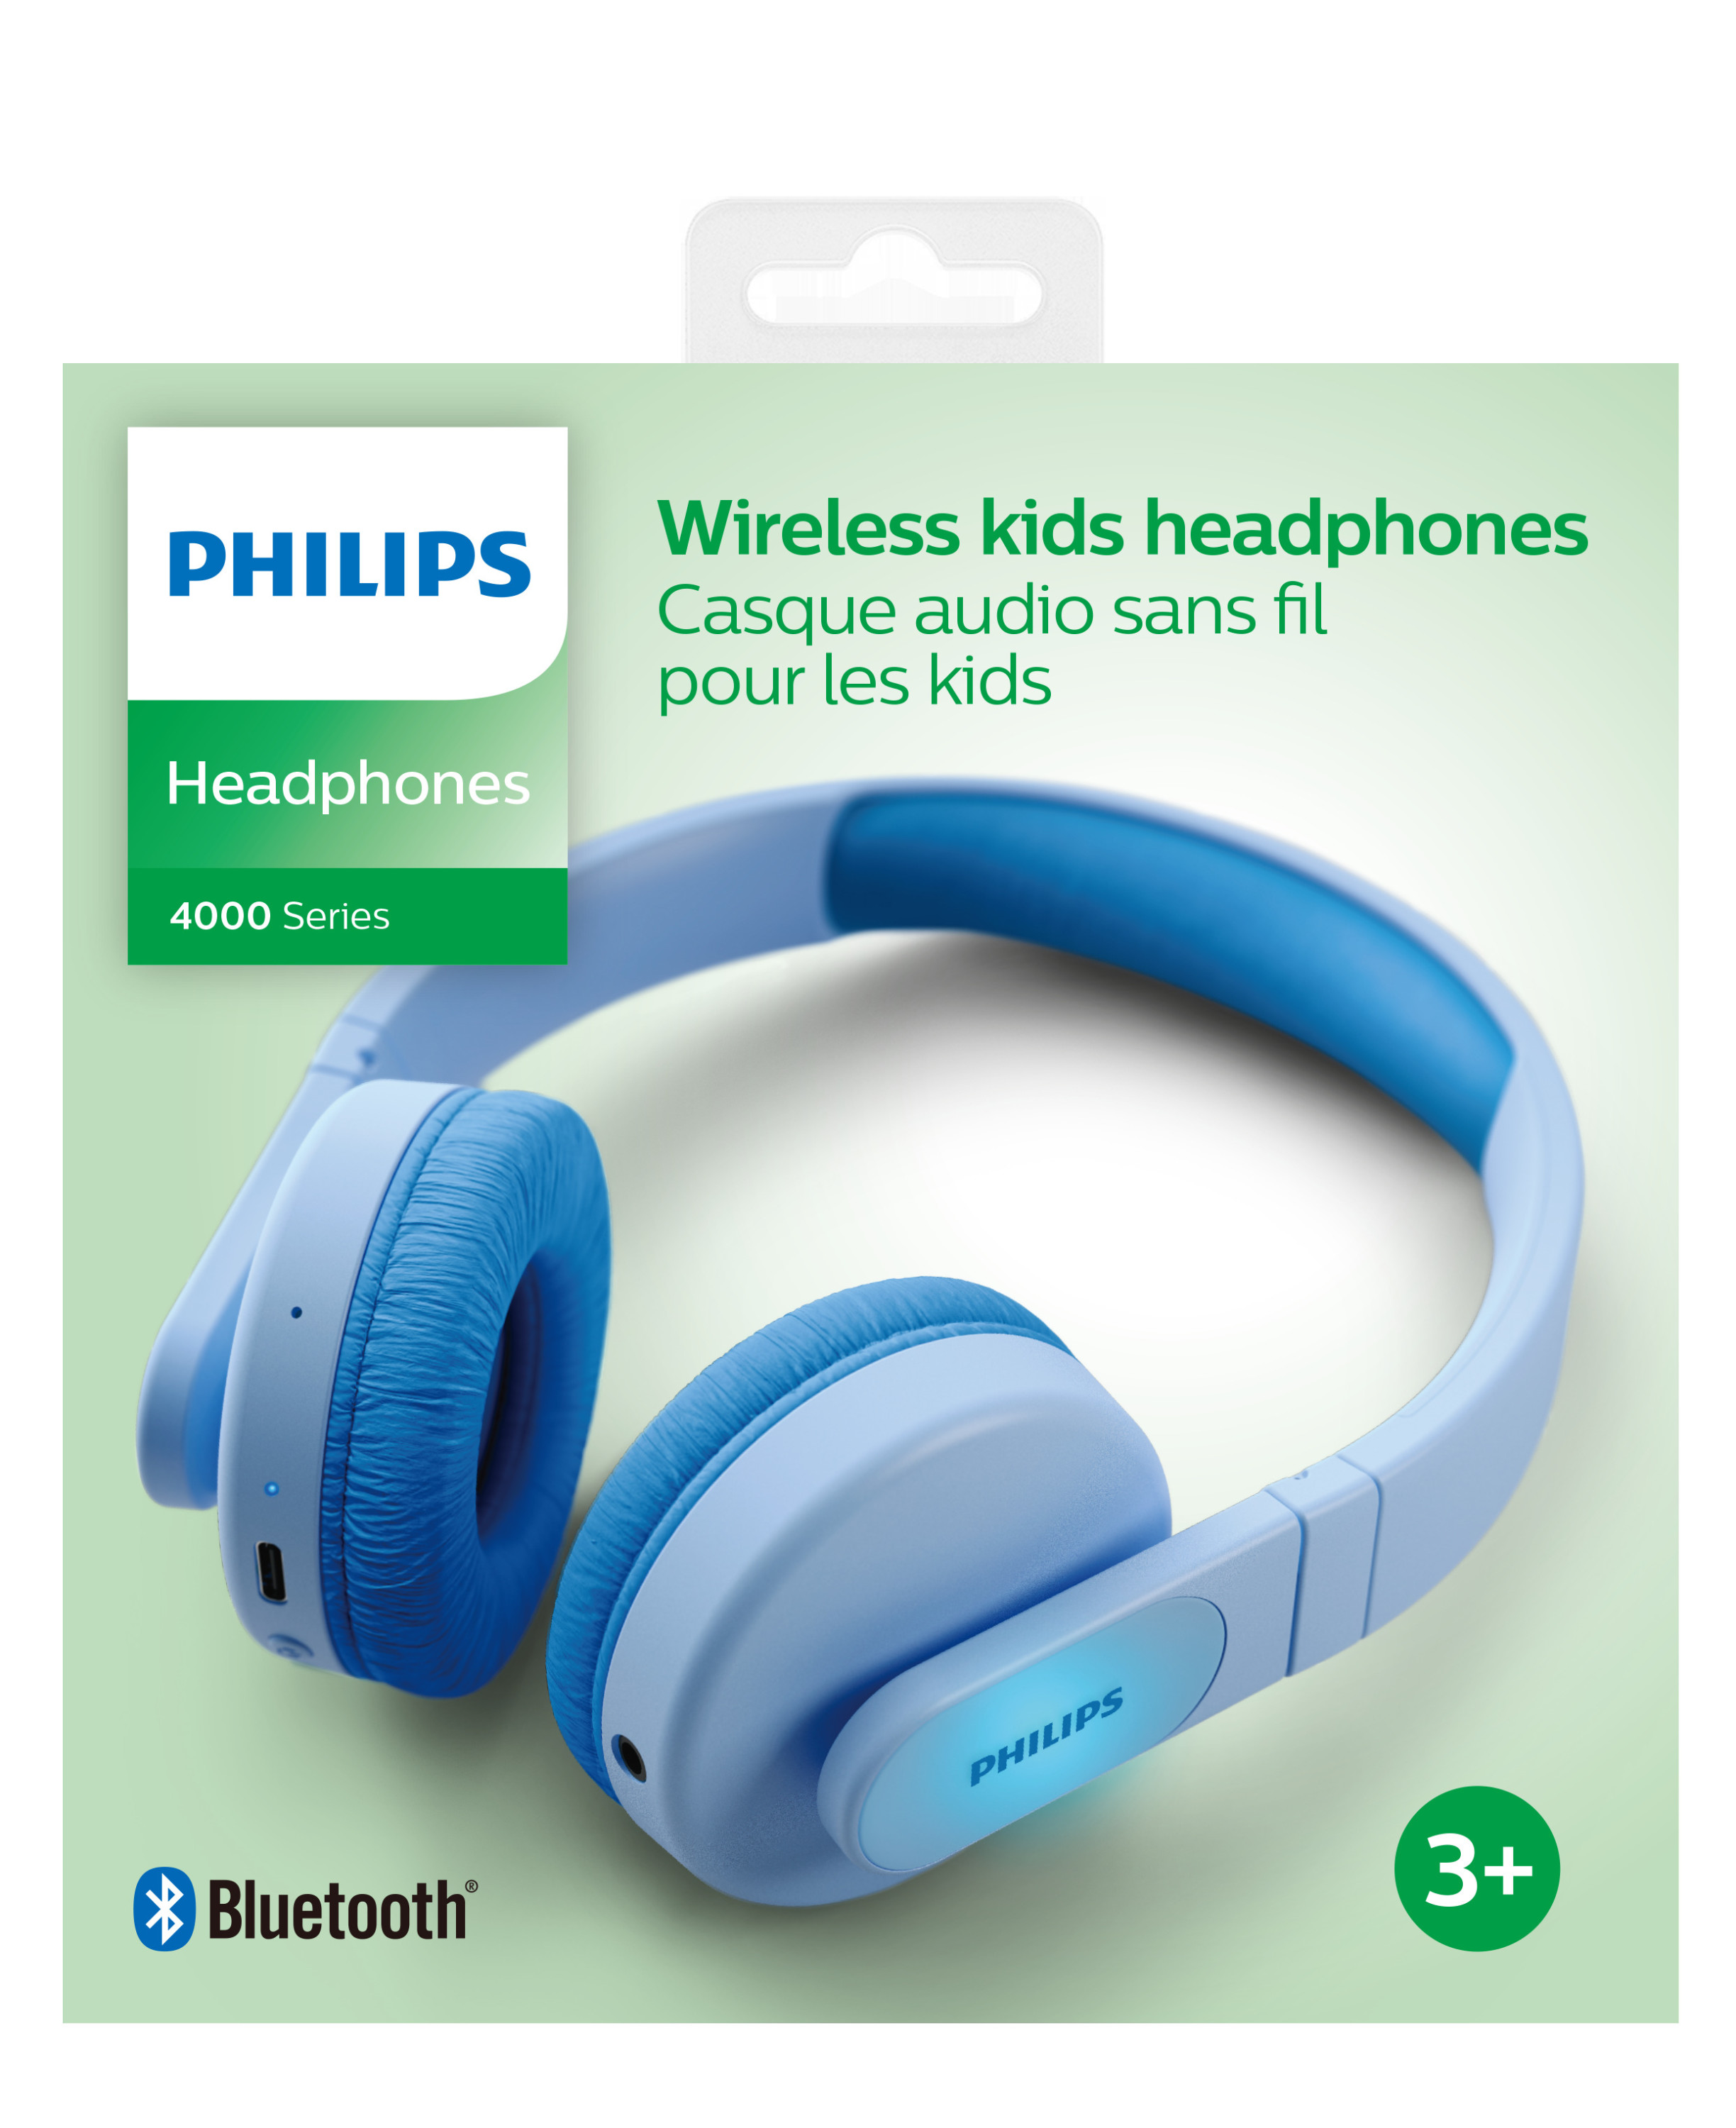 Philips K4206 Kids Wireless on-Ear Headphones with Parental Controls, Blue, TAK4206BL - image 5 of 11